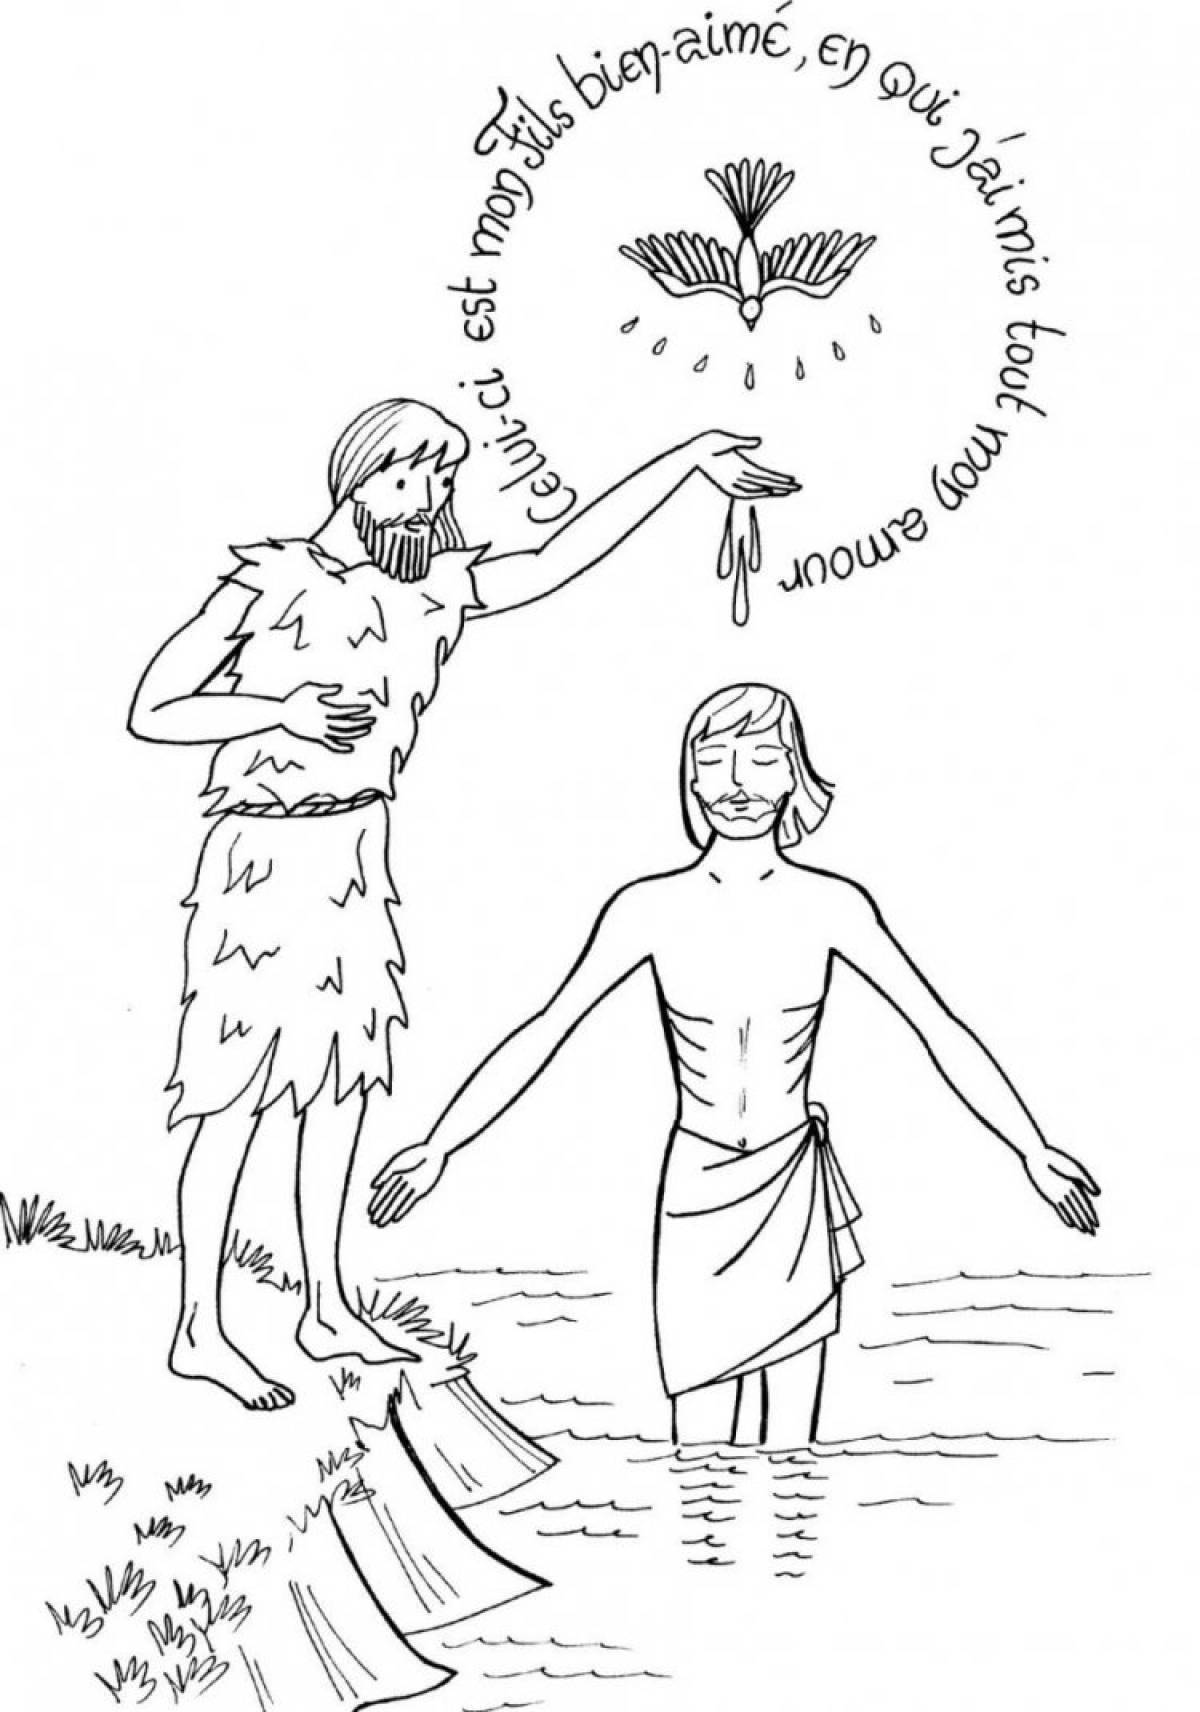 Glorious Baptism coloring page